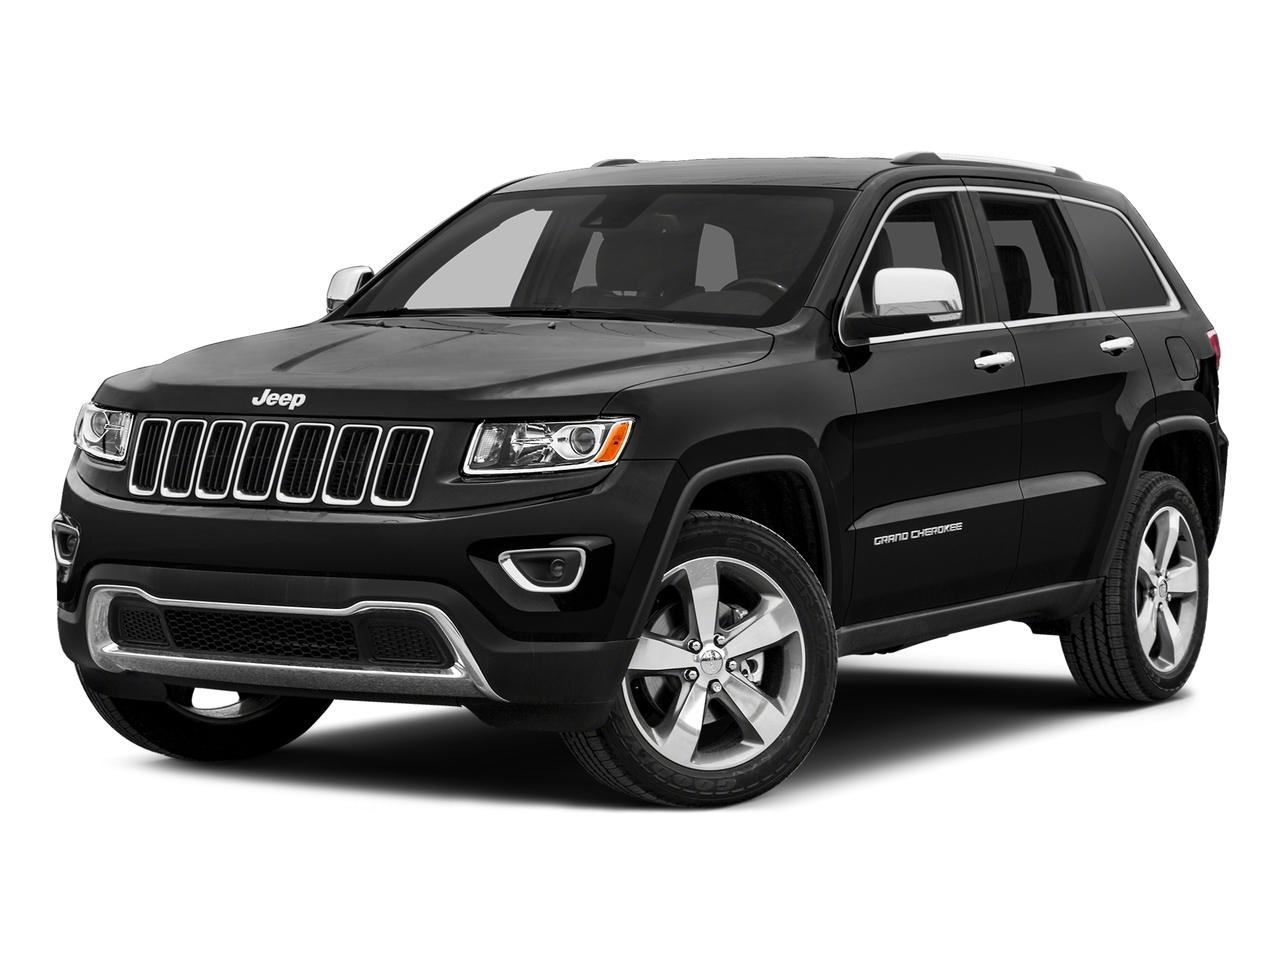 2015 Jeep Grand Cherokee Vehicle Photo in Plainfield, IL 60586